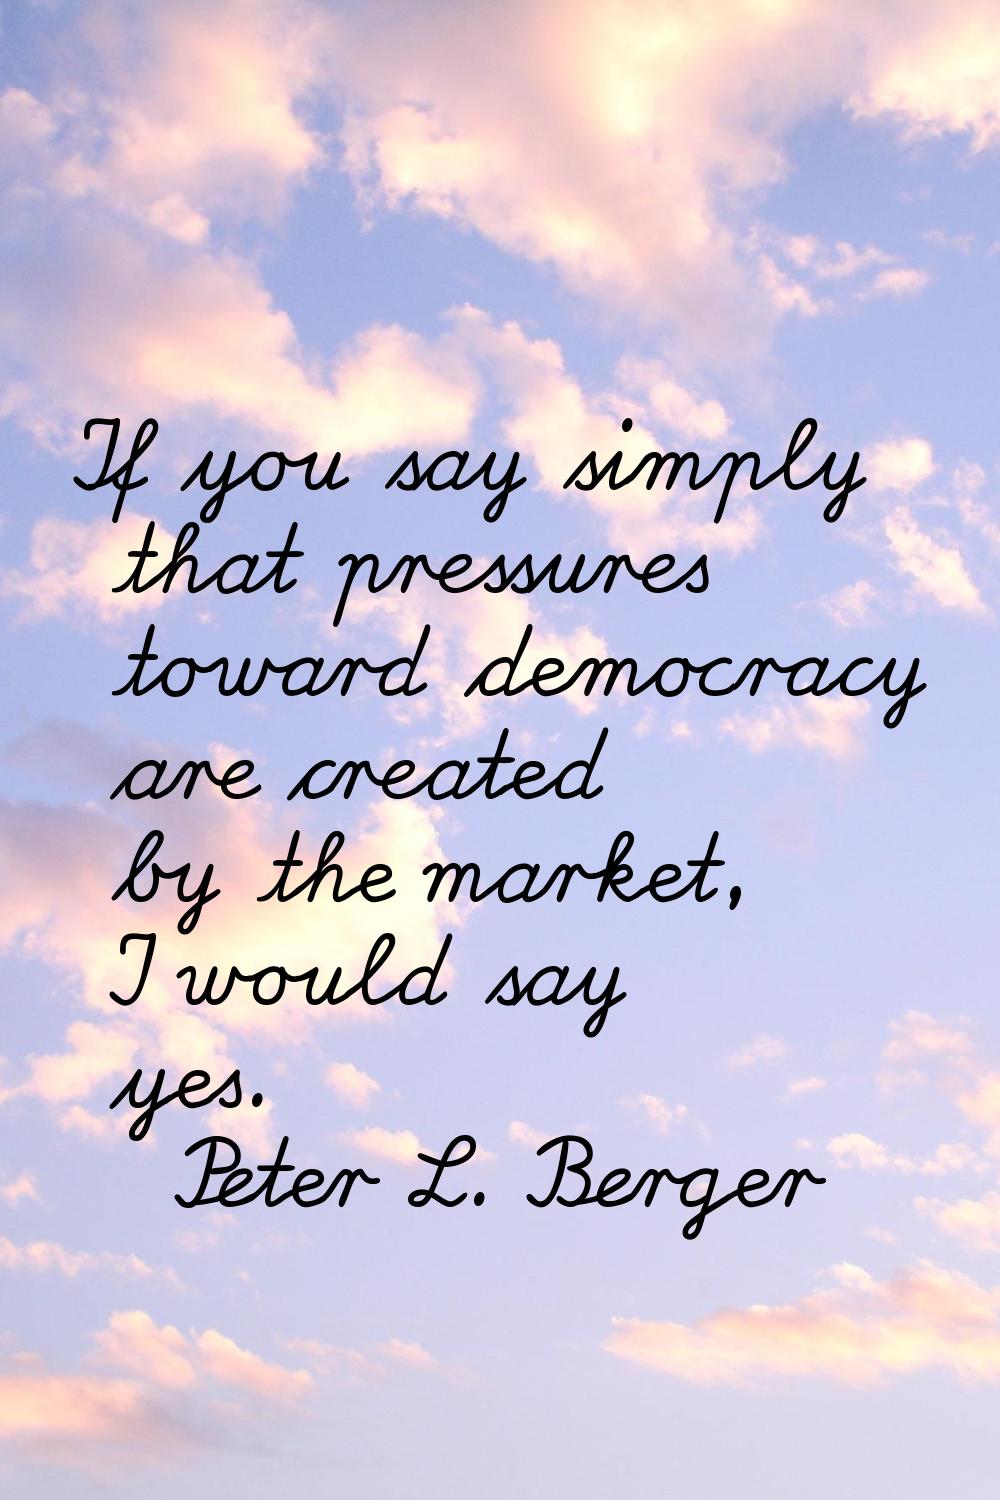 If you say simply that pressures toward democracy are created by the market, I would say yes.